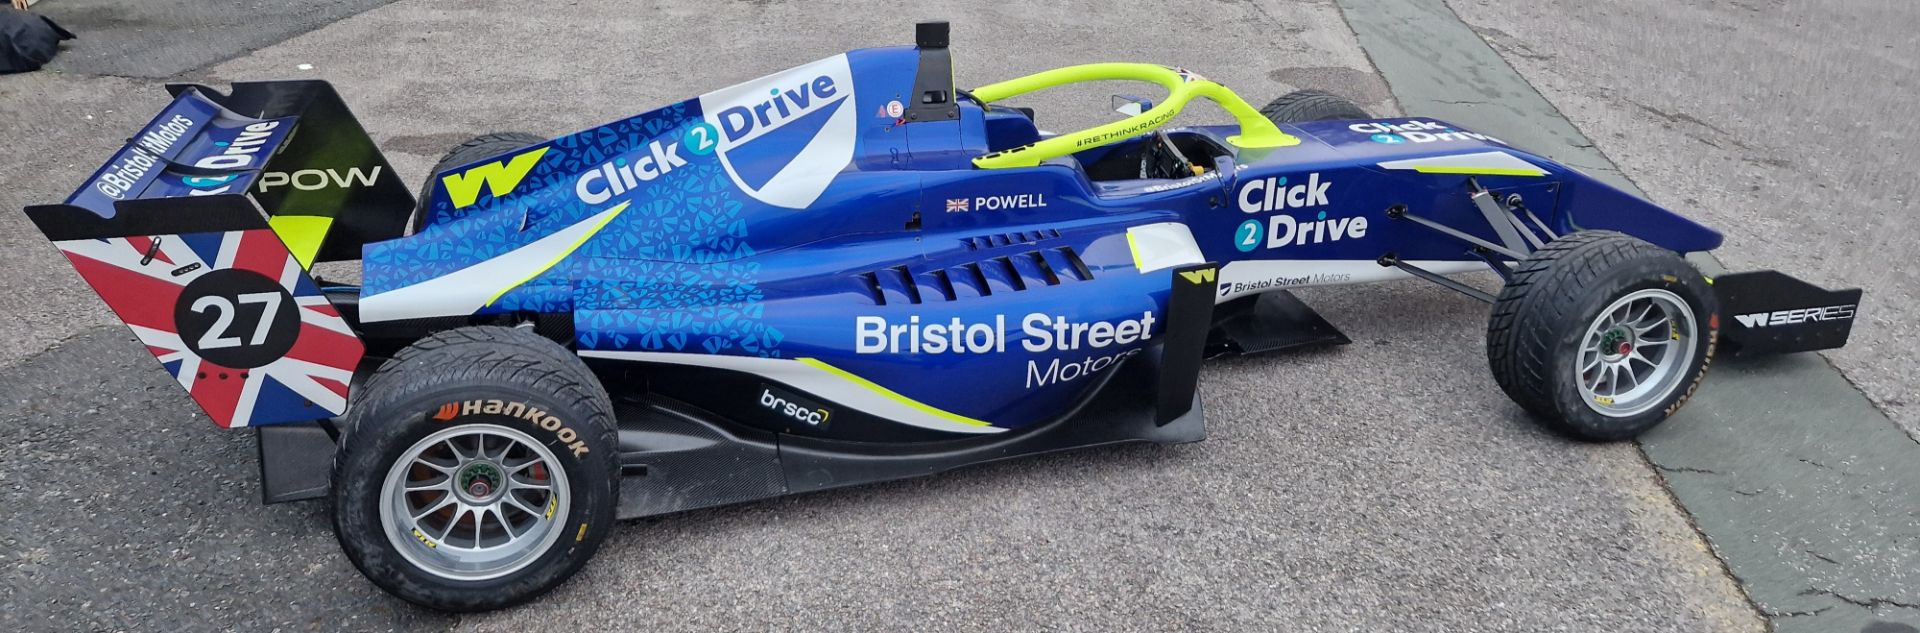 One TATUUS F3 T-318 Alfa Romeo Race Car Chassis No. 043 (2019) Finished in Bristol Street Motors - Image 2 of 10